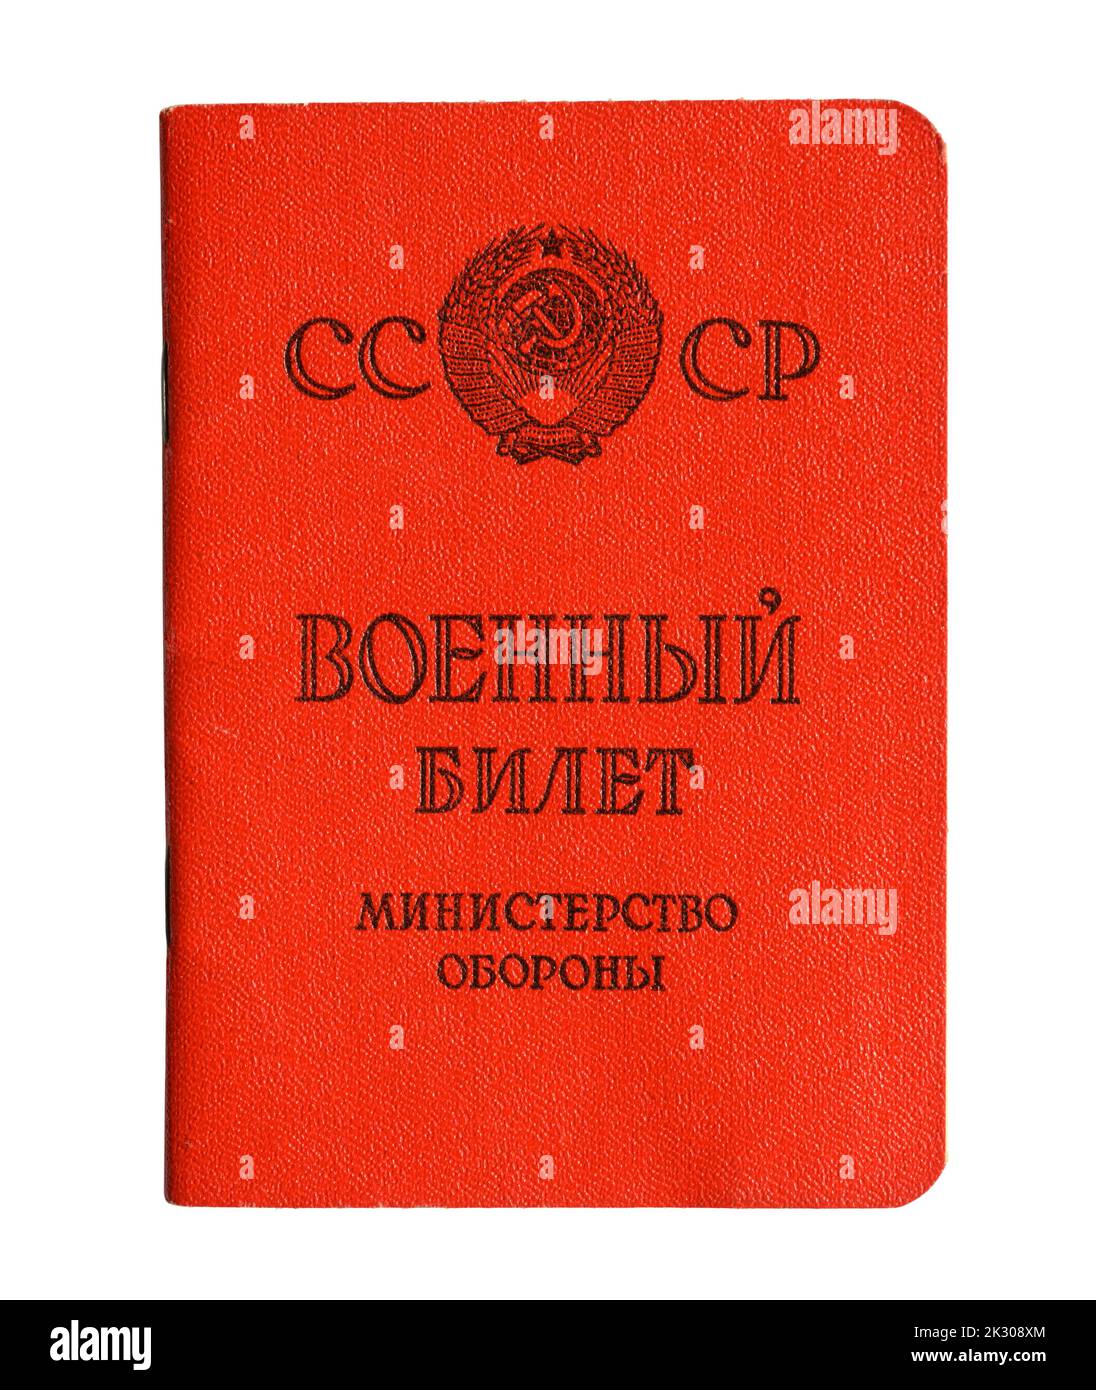 Certificate of Soviet Union serviceman isolated on white background. Concept of mobilization in Russia, war in Ukraine and Russian reservist. Translat Stock Photo